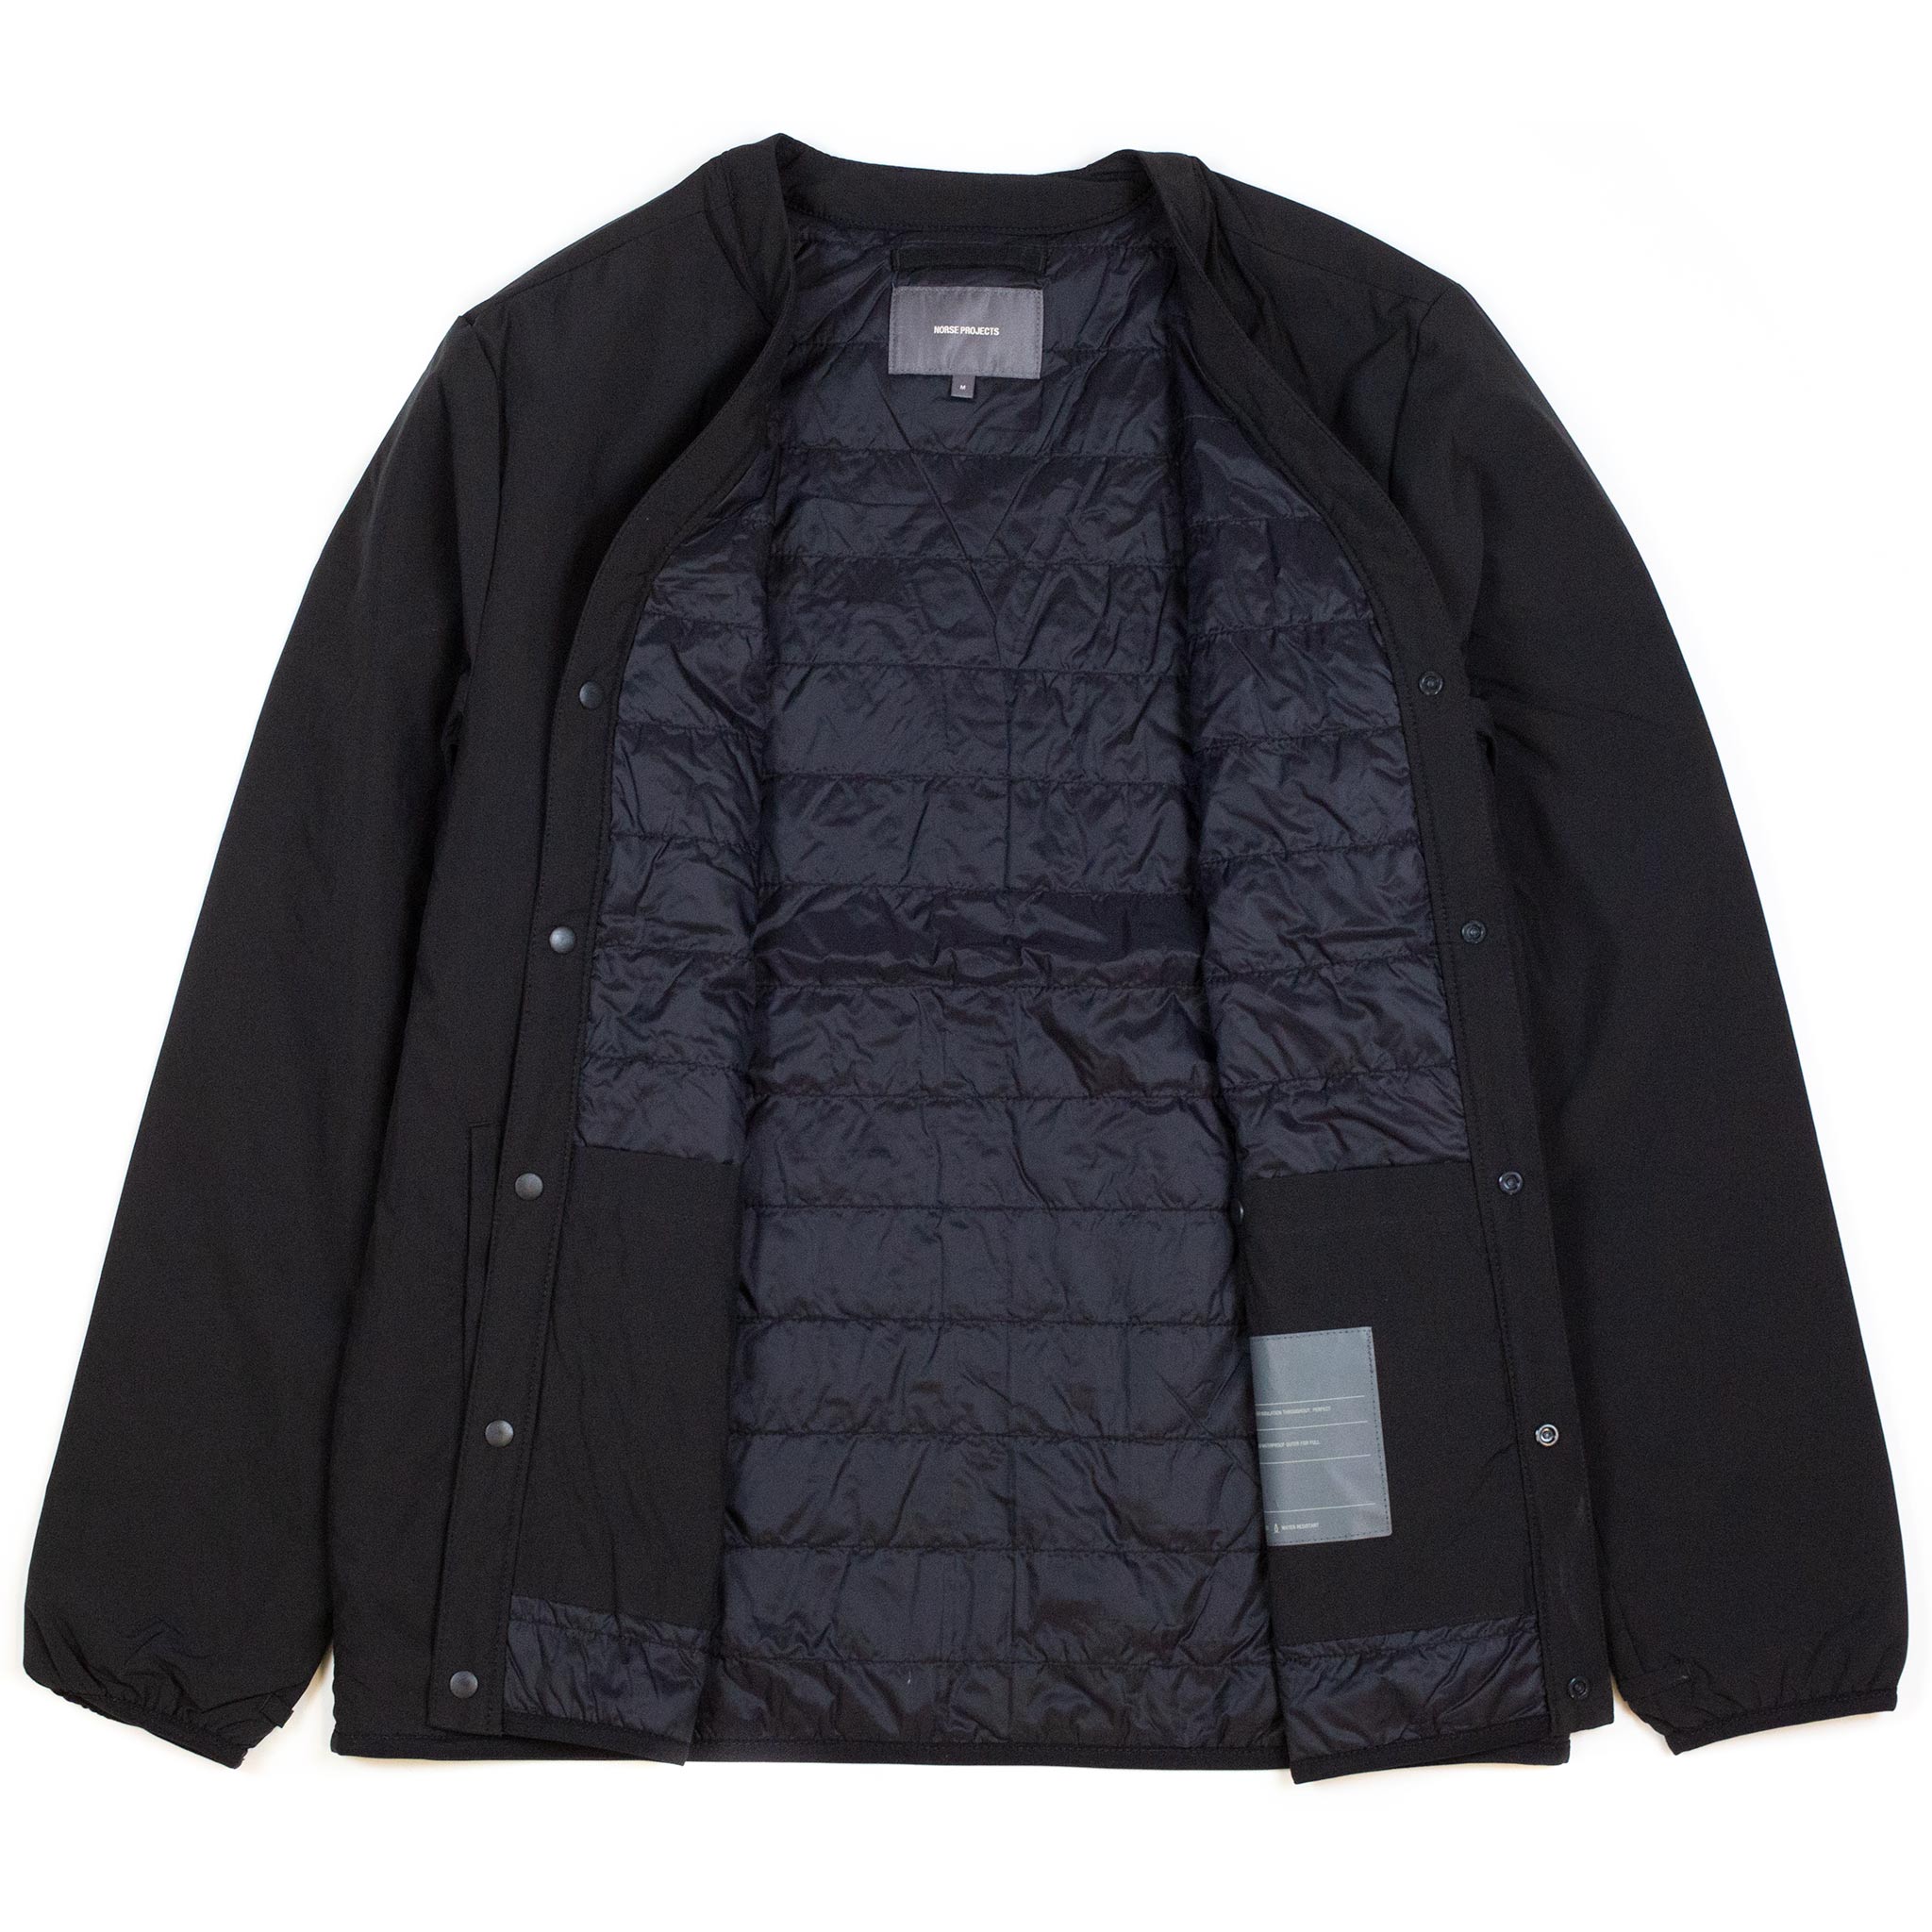 Norse Projects Otto Light WR Jacket Black